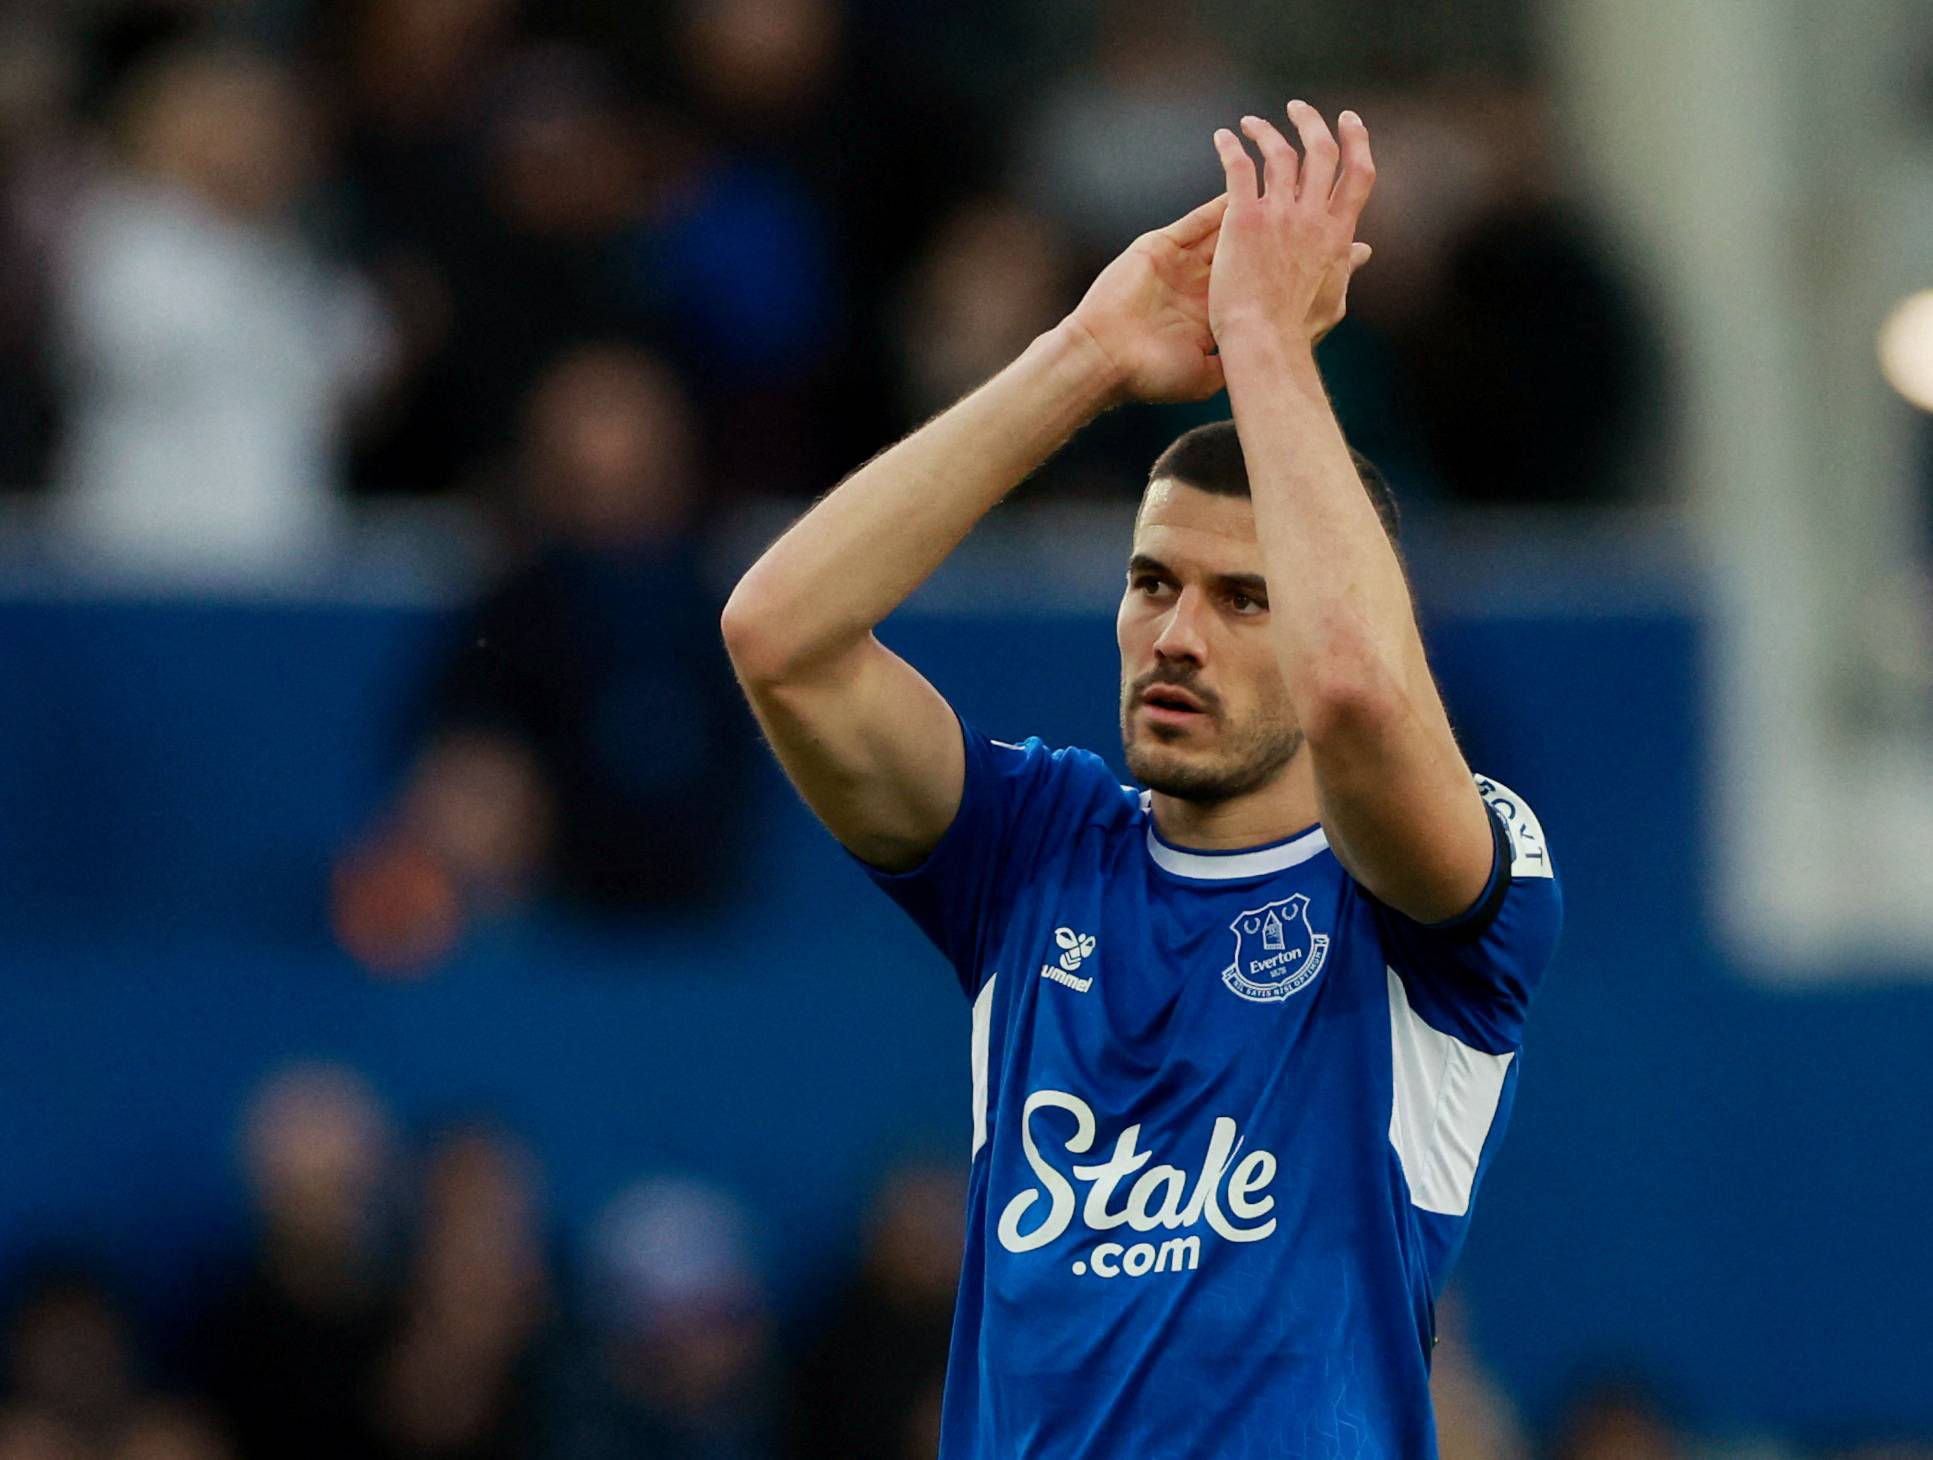 Everton: Conor Coady could leave even if Toffees stay up - Everton News